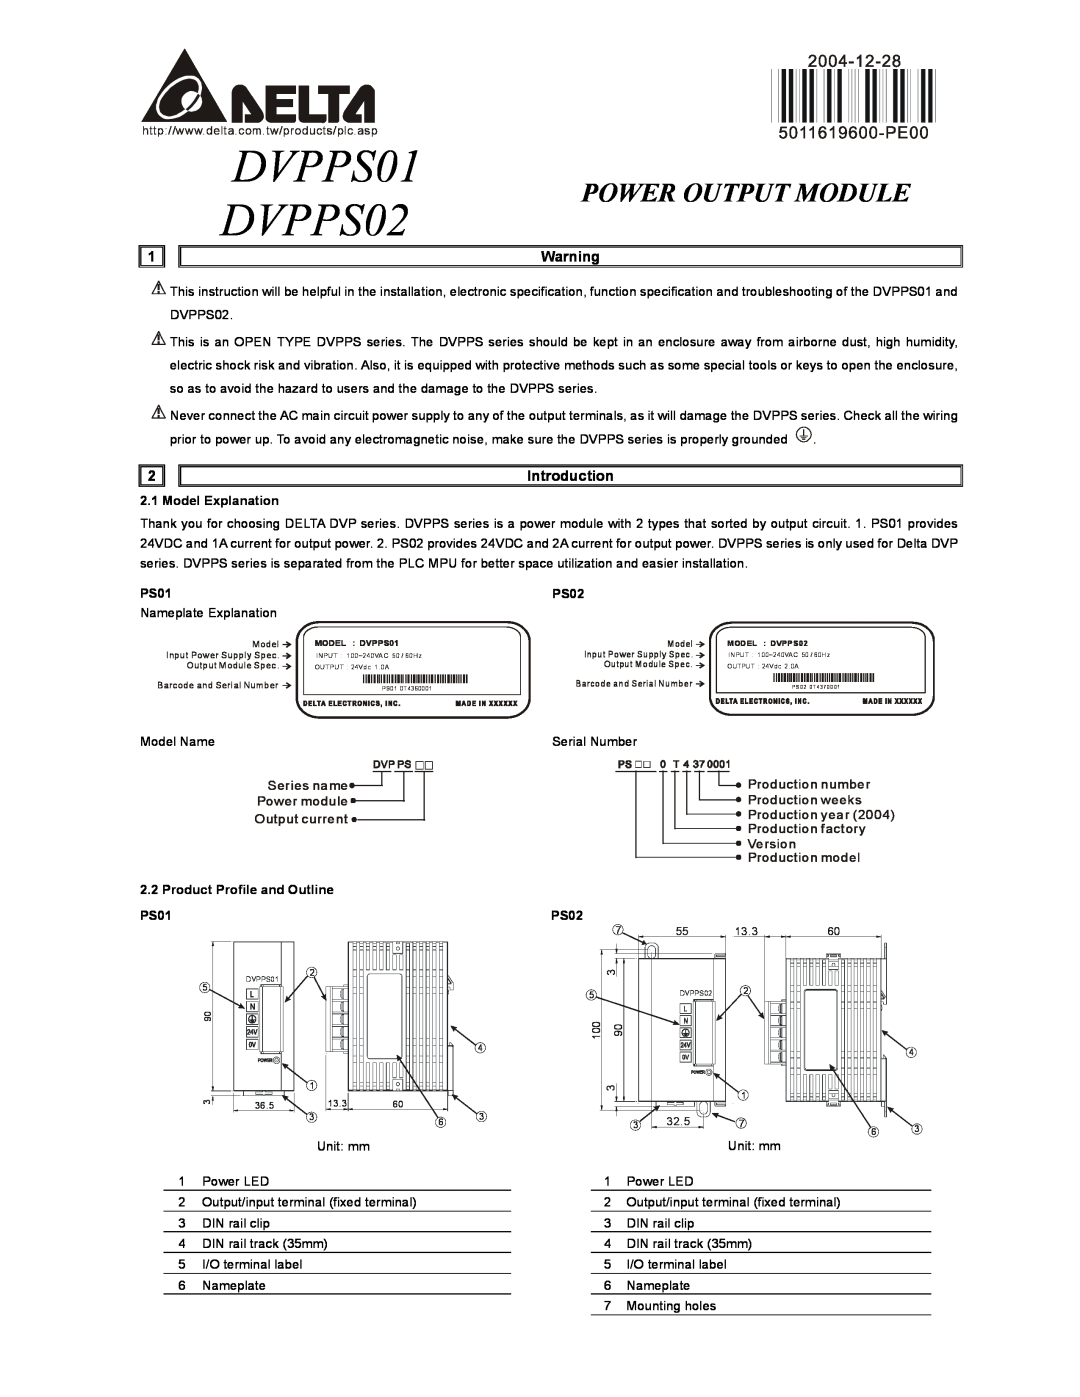 Delta Electronics manual Introduction, Model Explanation, Product Profile and Outline PS01, DVPPS01 DVPPS02 